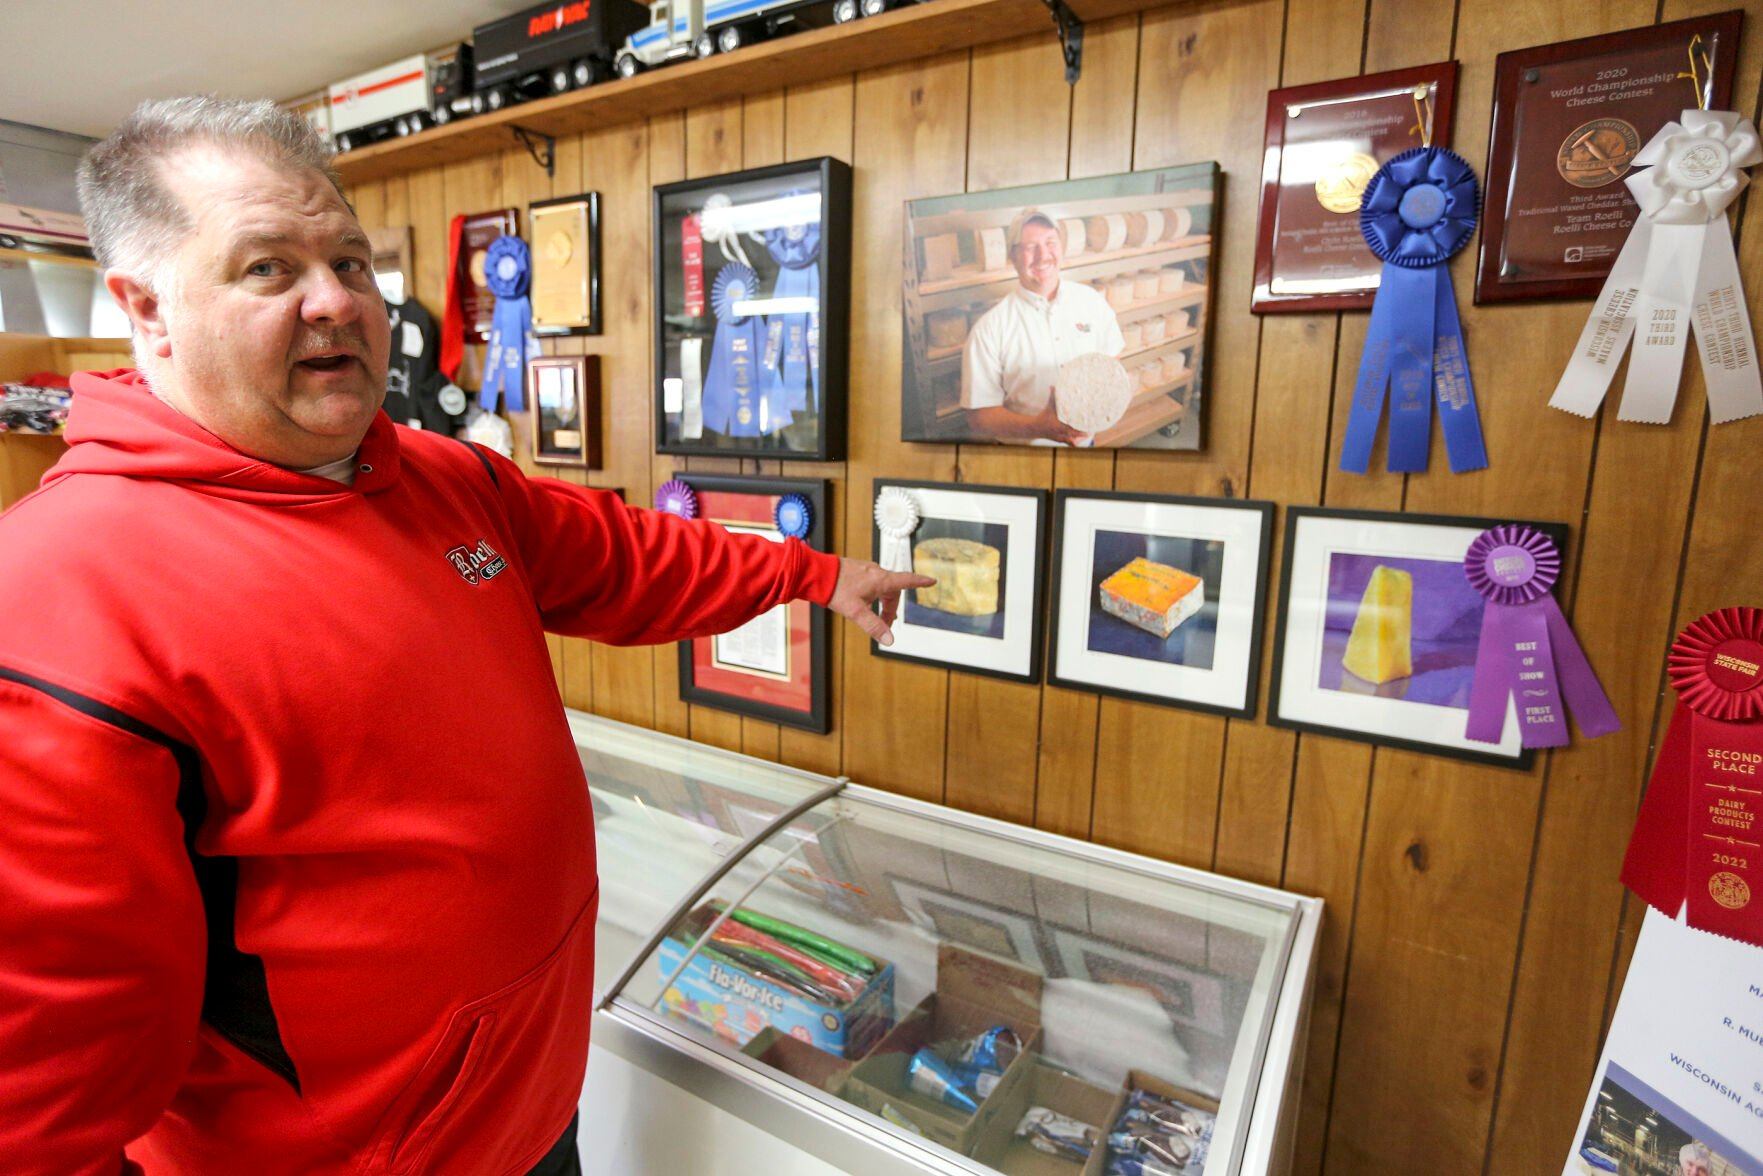 Cheese Master Chris Roelli, who operates Roelli Cheese Haus in Shullsburg, Wis., shows off his award winning cheeses on Tuesday, April 18, 2023.    PHOTO CREDIT: Dave Kettering
Telegraph Herald